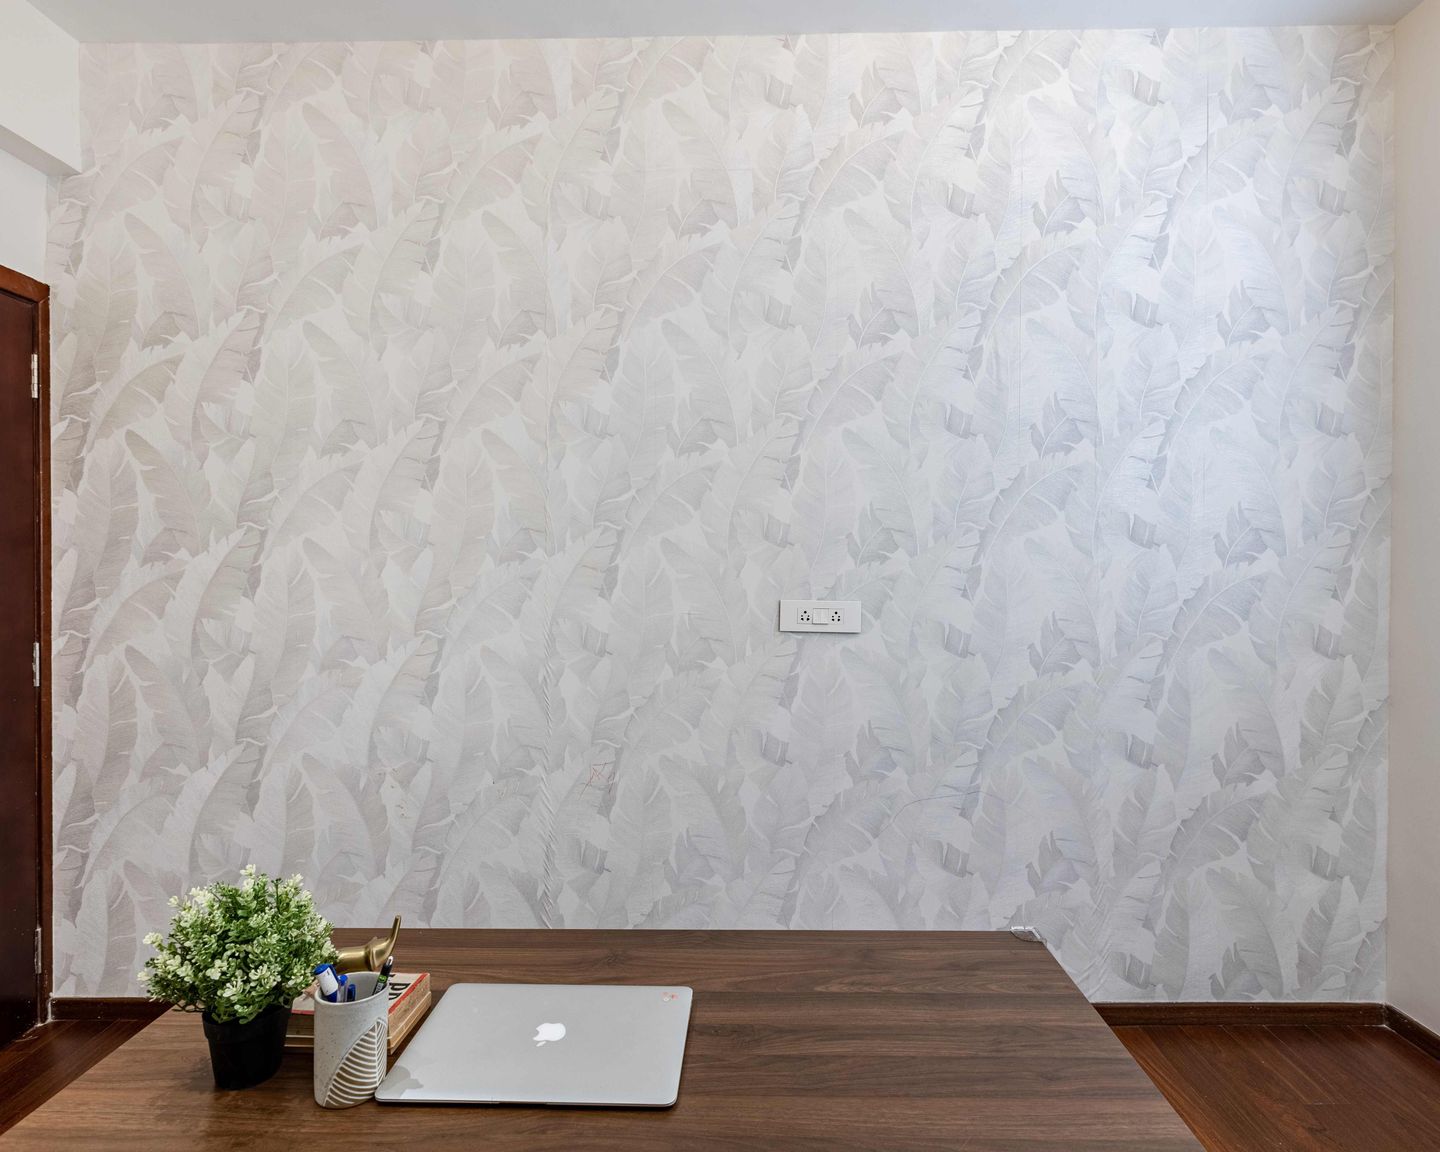 Leaf-Themed Contemporary Wallpaper - Livspace